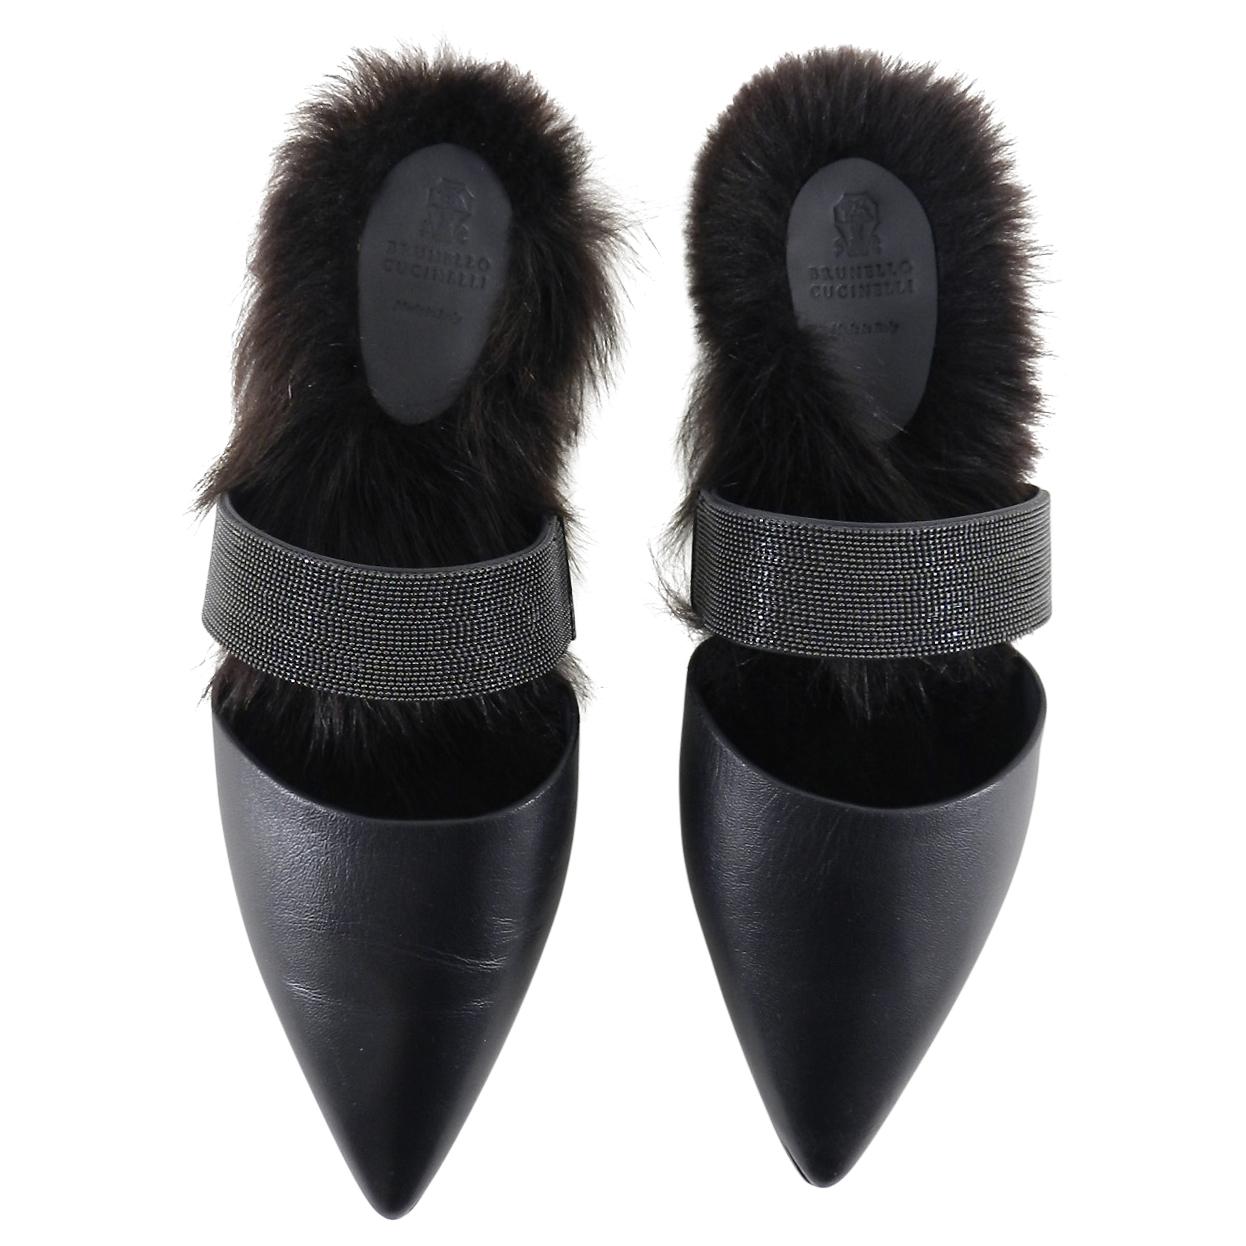 Brunello Cucinelli Monili Fur Trimmed Flat Slides.  Original retail $1900 CAD. Black leather upper with pointed toe and beaded strap.  Dyed lamb fur lined instep. Marked size 37 (USA 6.5).  Brand new unworn.  No box or dusters. We try our best to